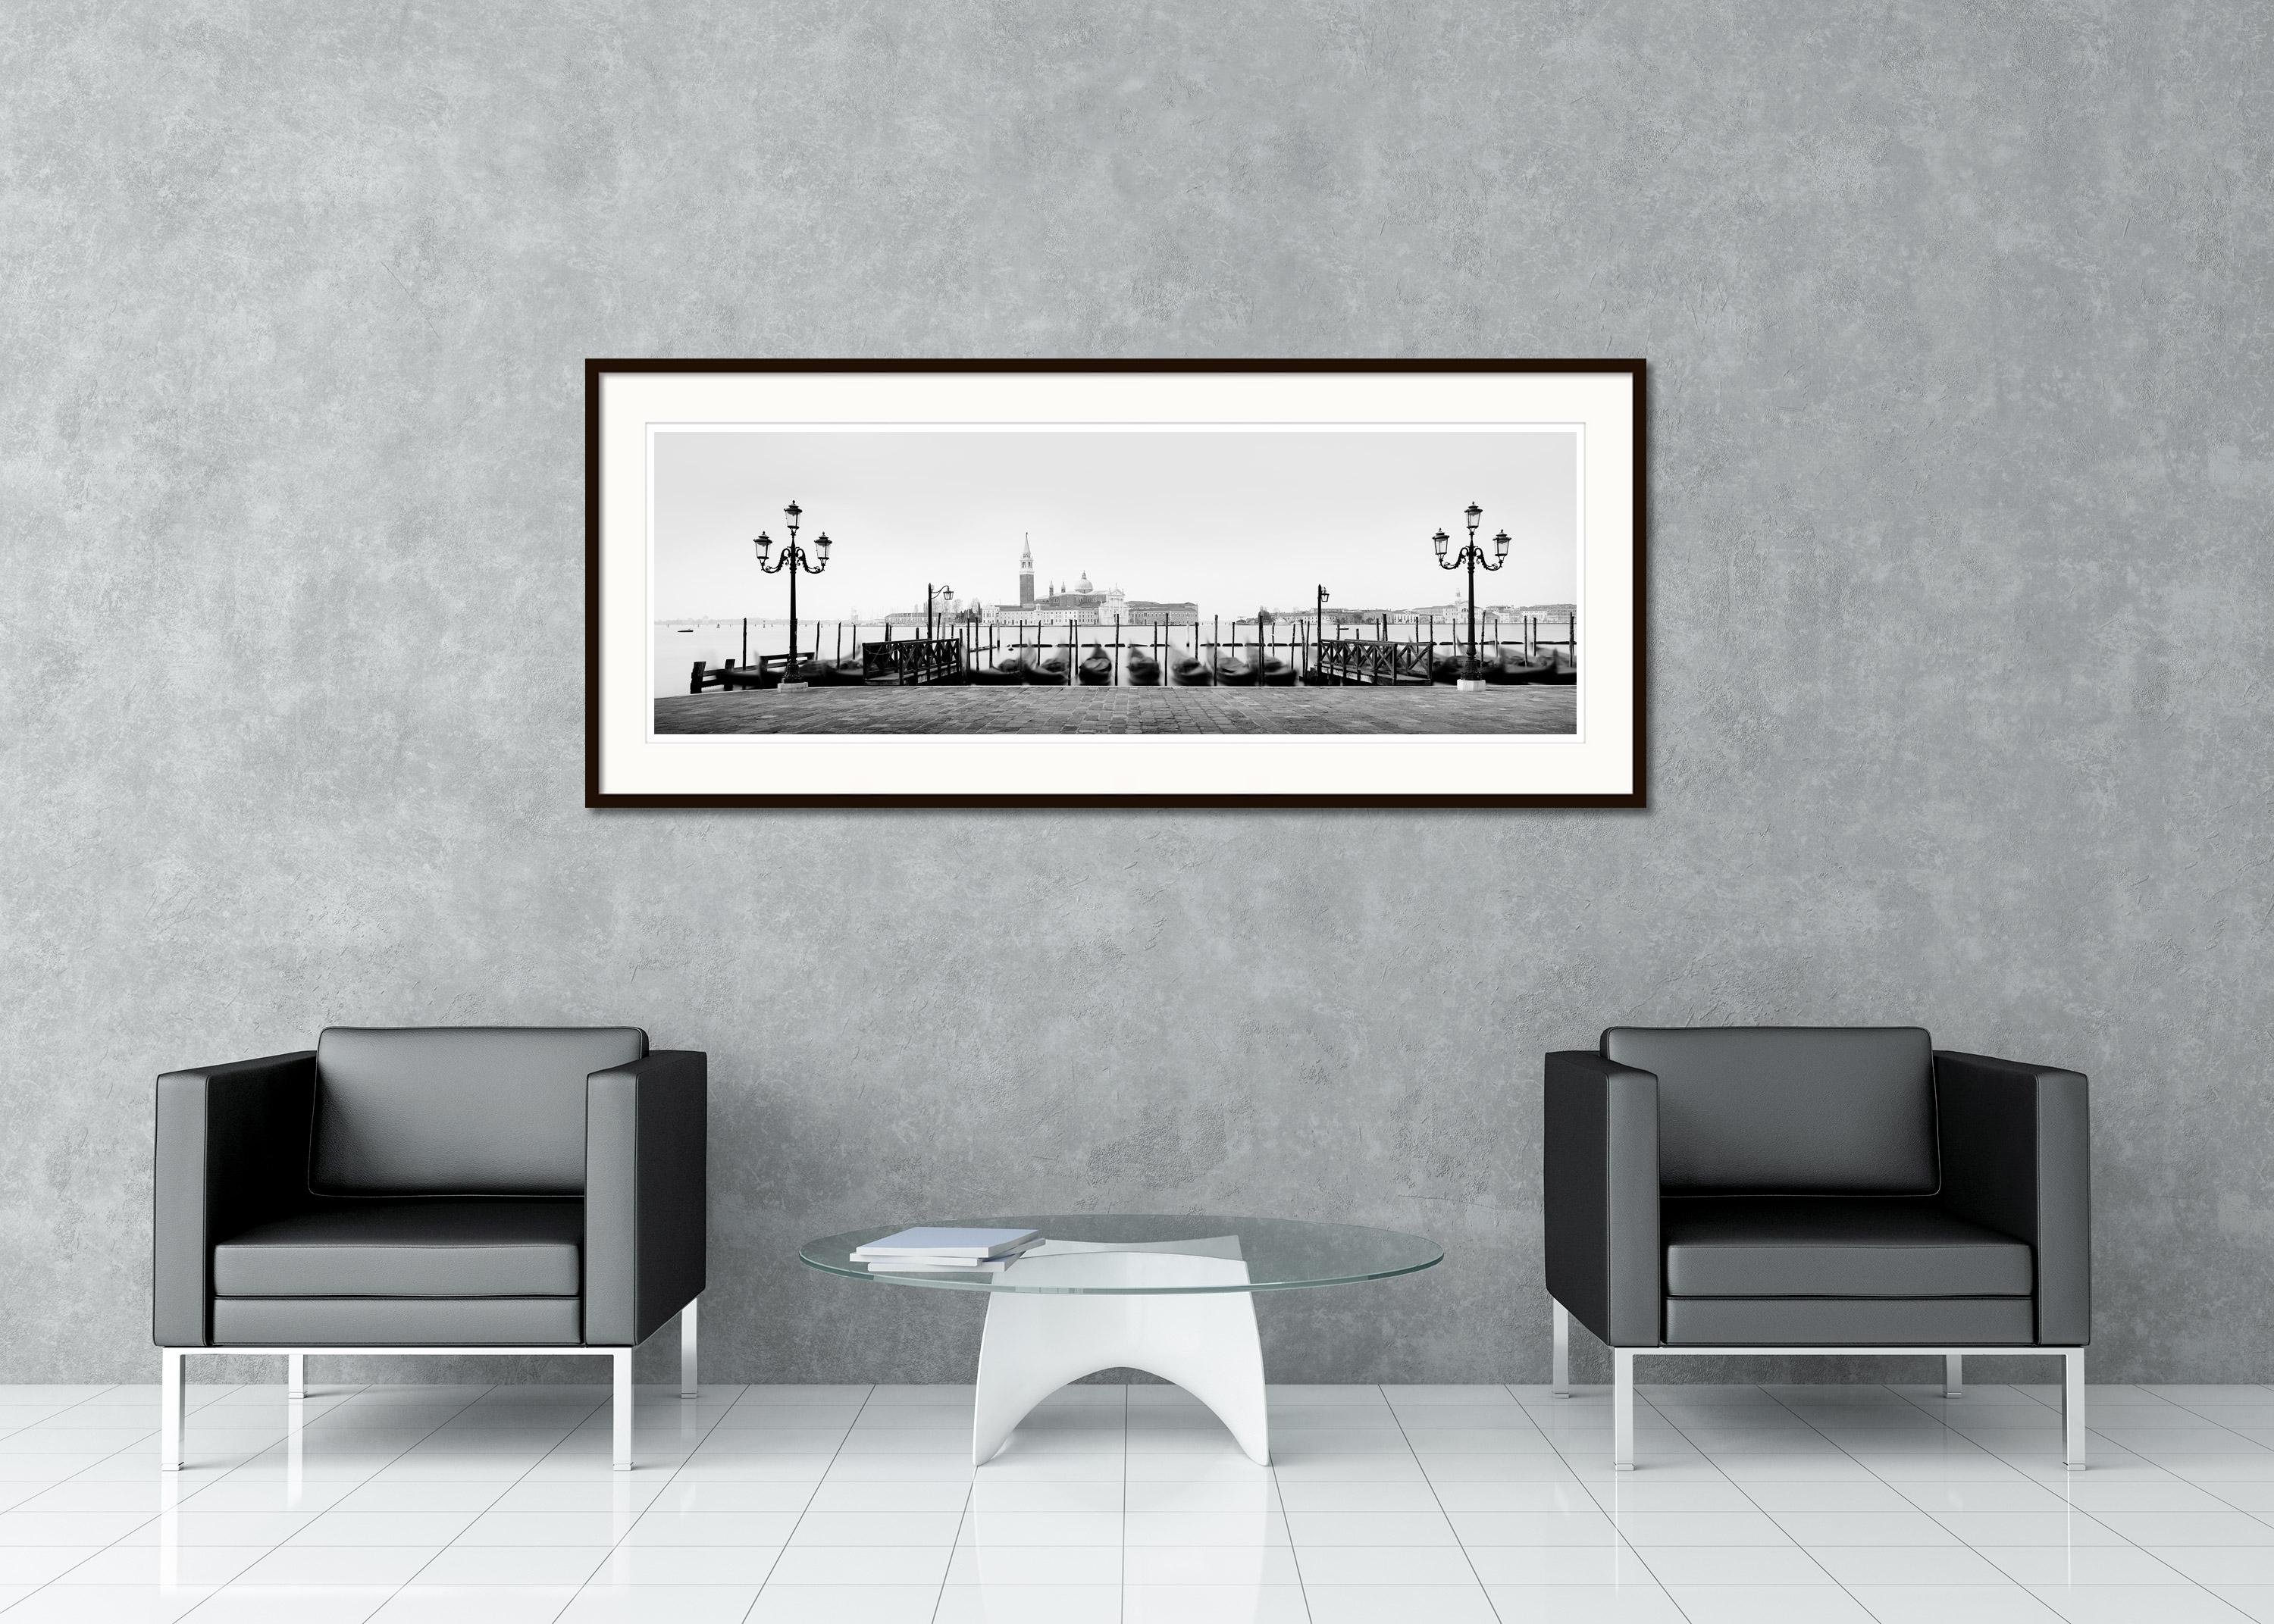 Black and white fine art panorama landscape - cityscape photography. Gondola in front of basilica on grand canal in Venice, Italy. Archival pigment ink print, edition of 7. Signed, titled, dated and numbered by artist. Certificate of authenticity